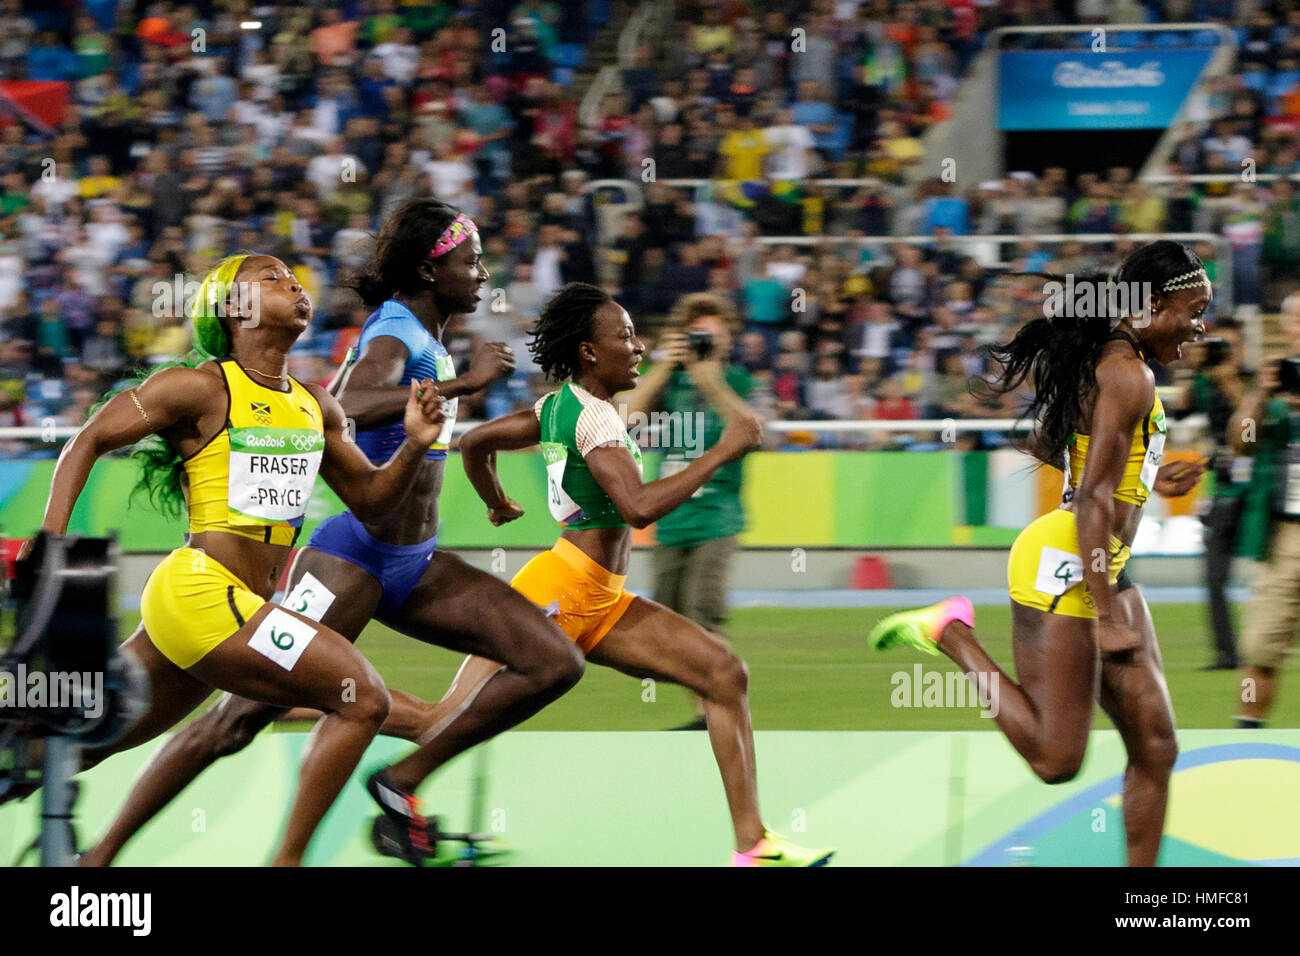 Rio de Janeiro, Brazil. 13 August 2016 .Elaine Tompson (JAM) leads the field on her way to winning the gold medal in the Women's 100m at the 2016 Ol Stock Photo